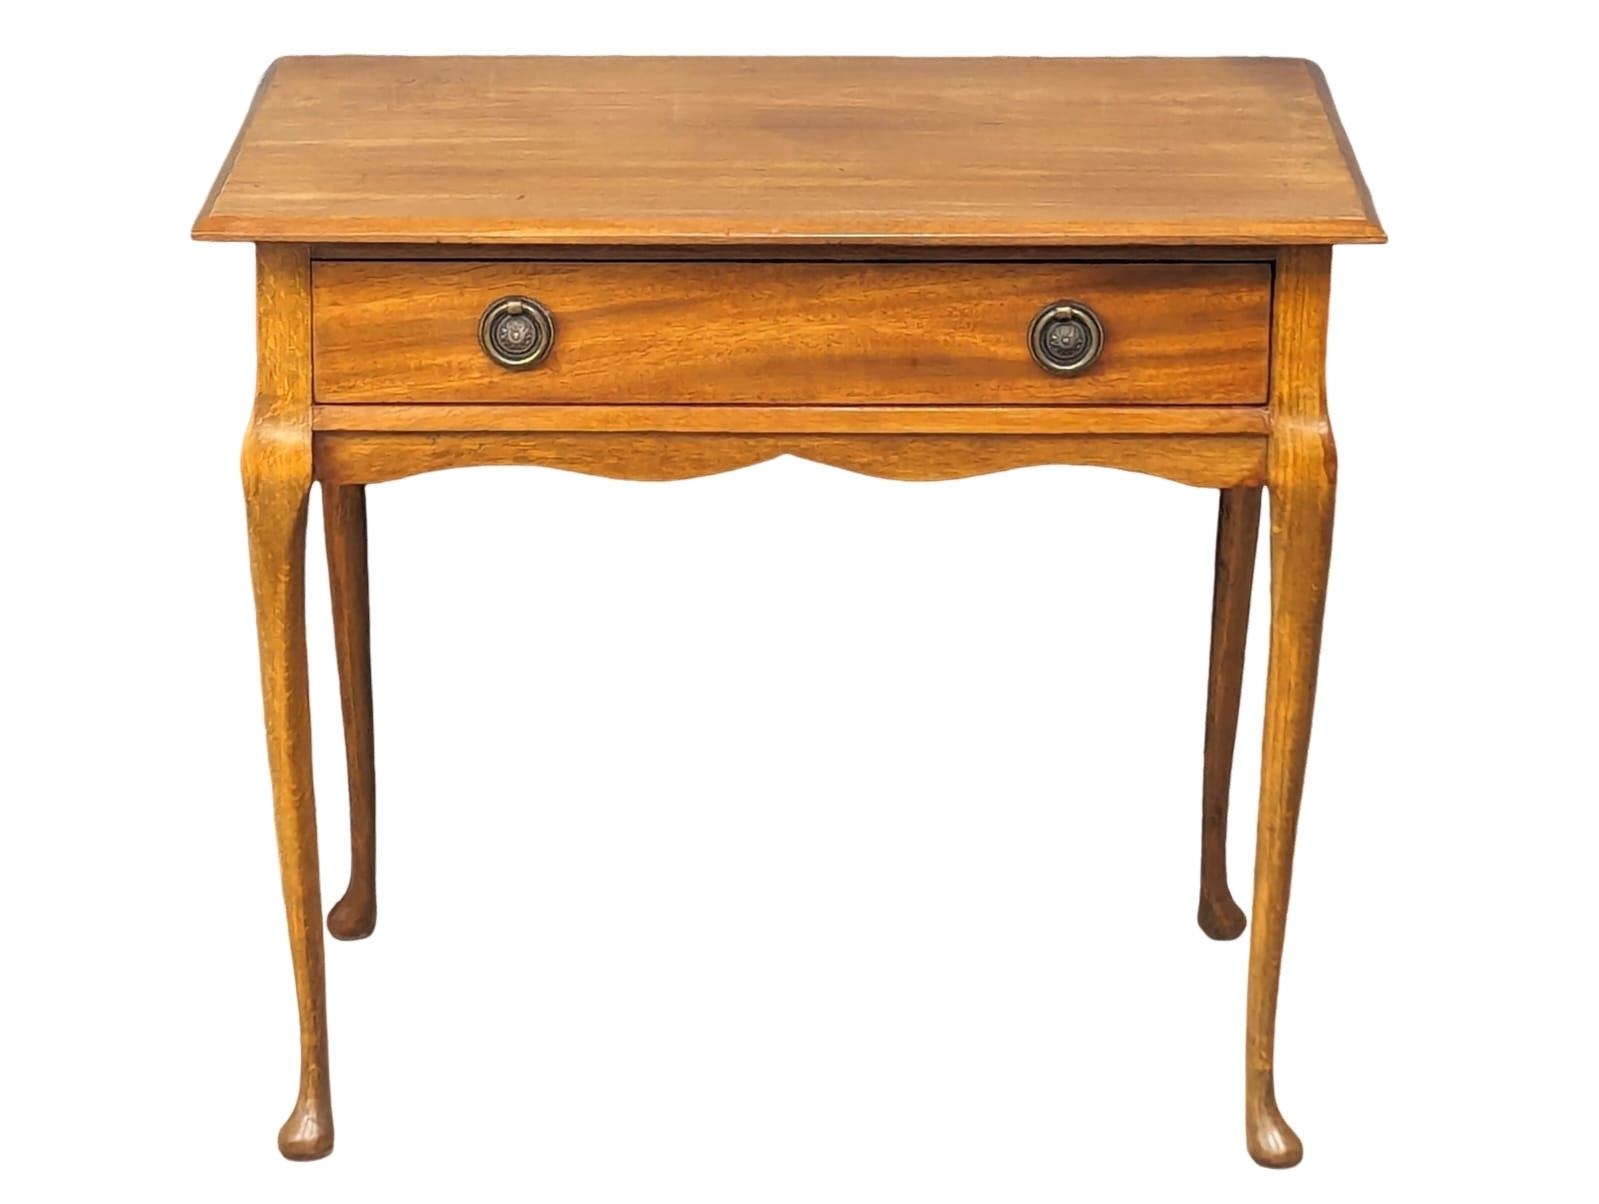 A small mahogany & beech side table with drawer on cabriole legs, 59cm x 39cm x 52cm - Image 4 of 5